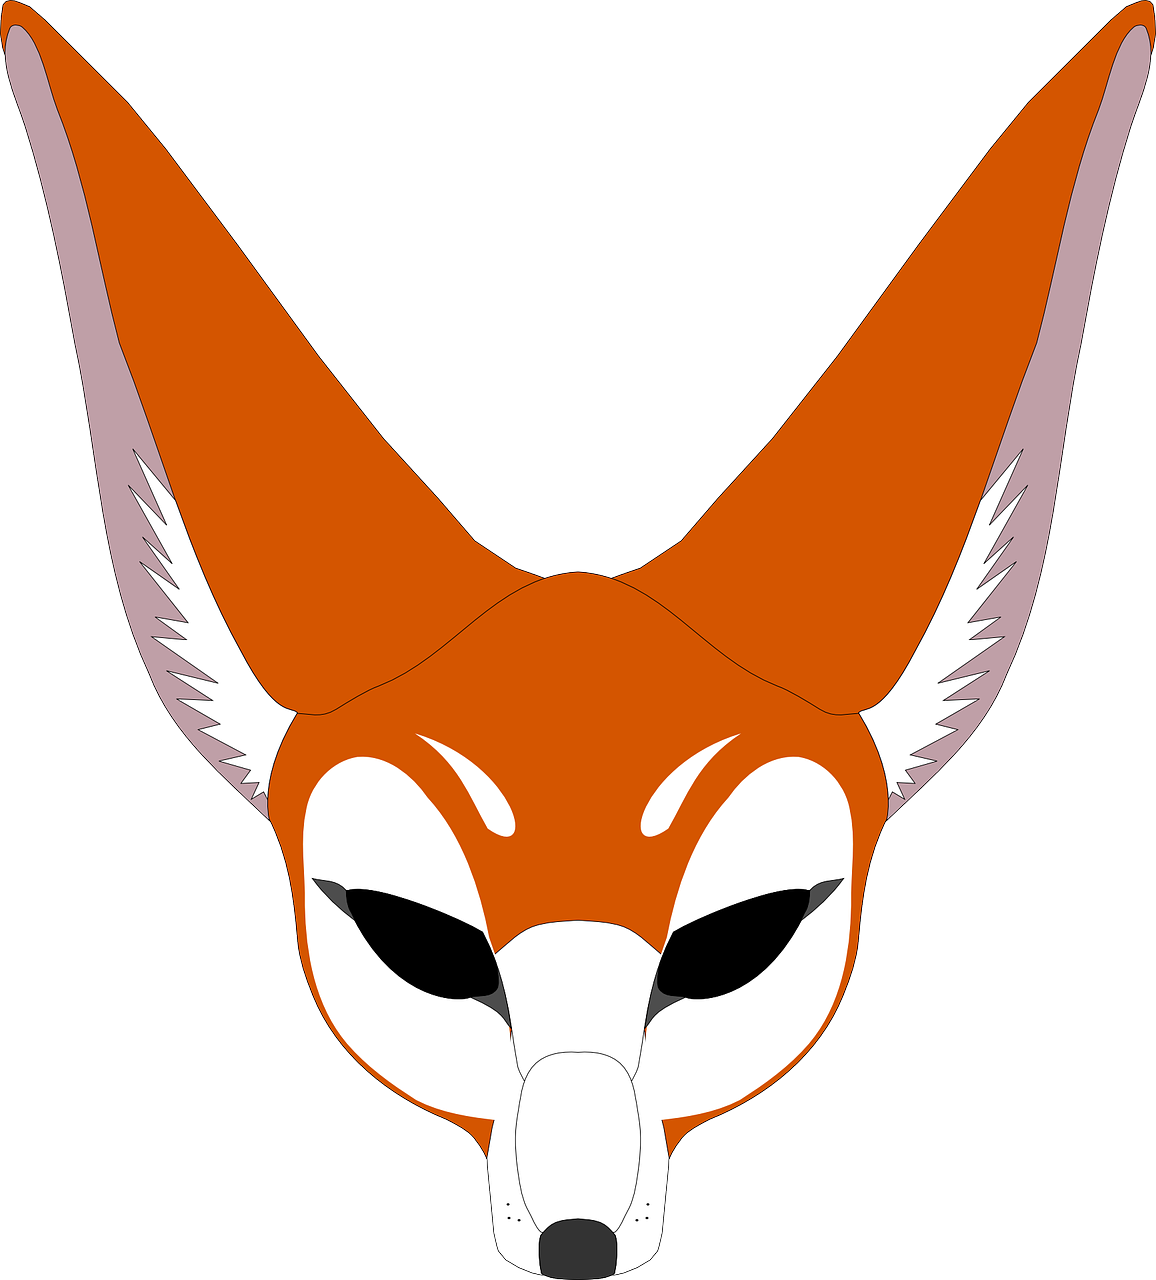 Stylized Coyote Head Illustration PNG image